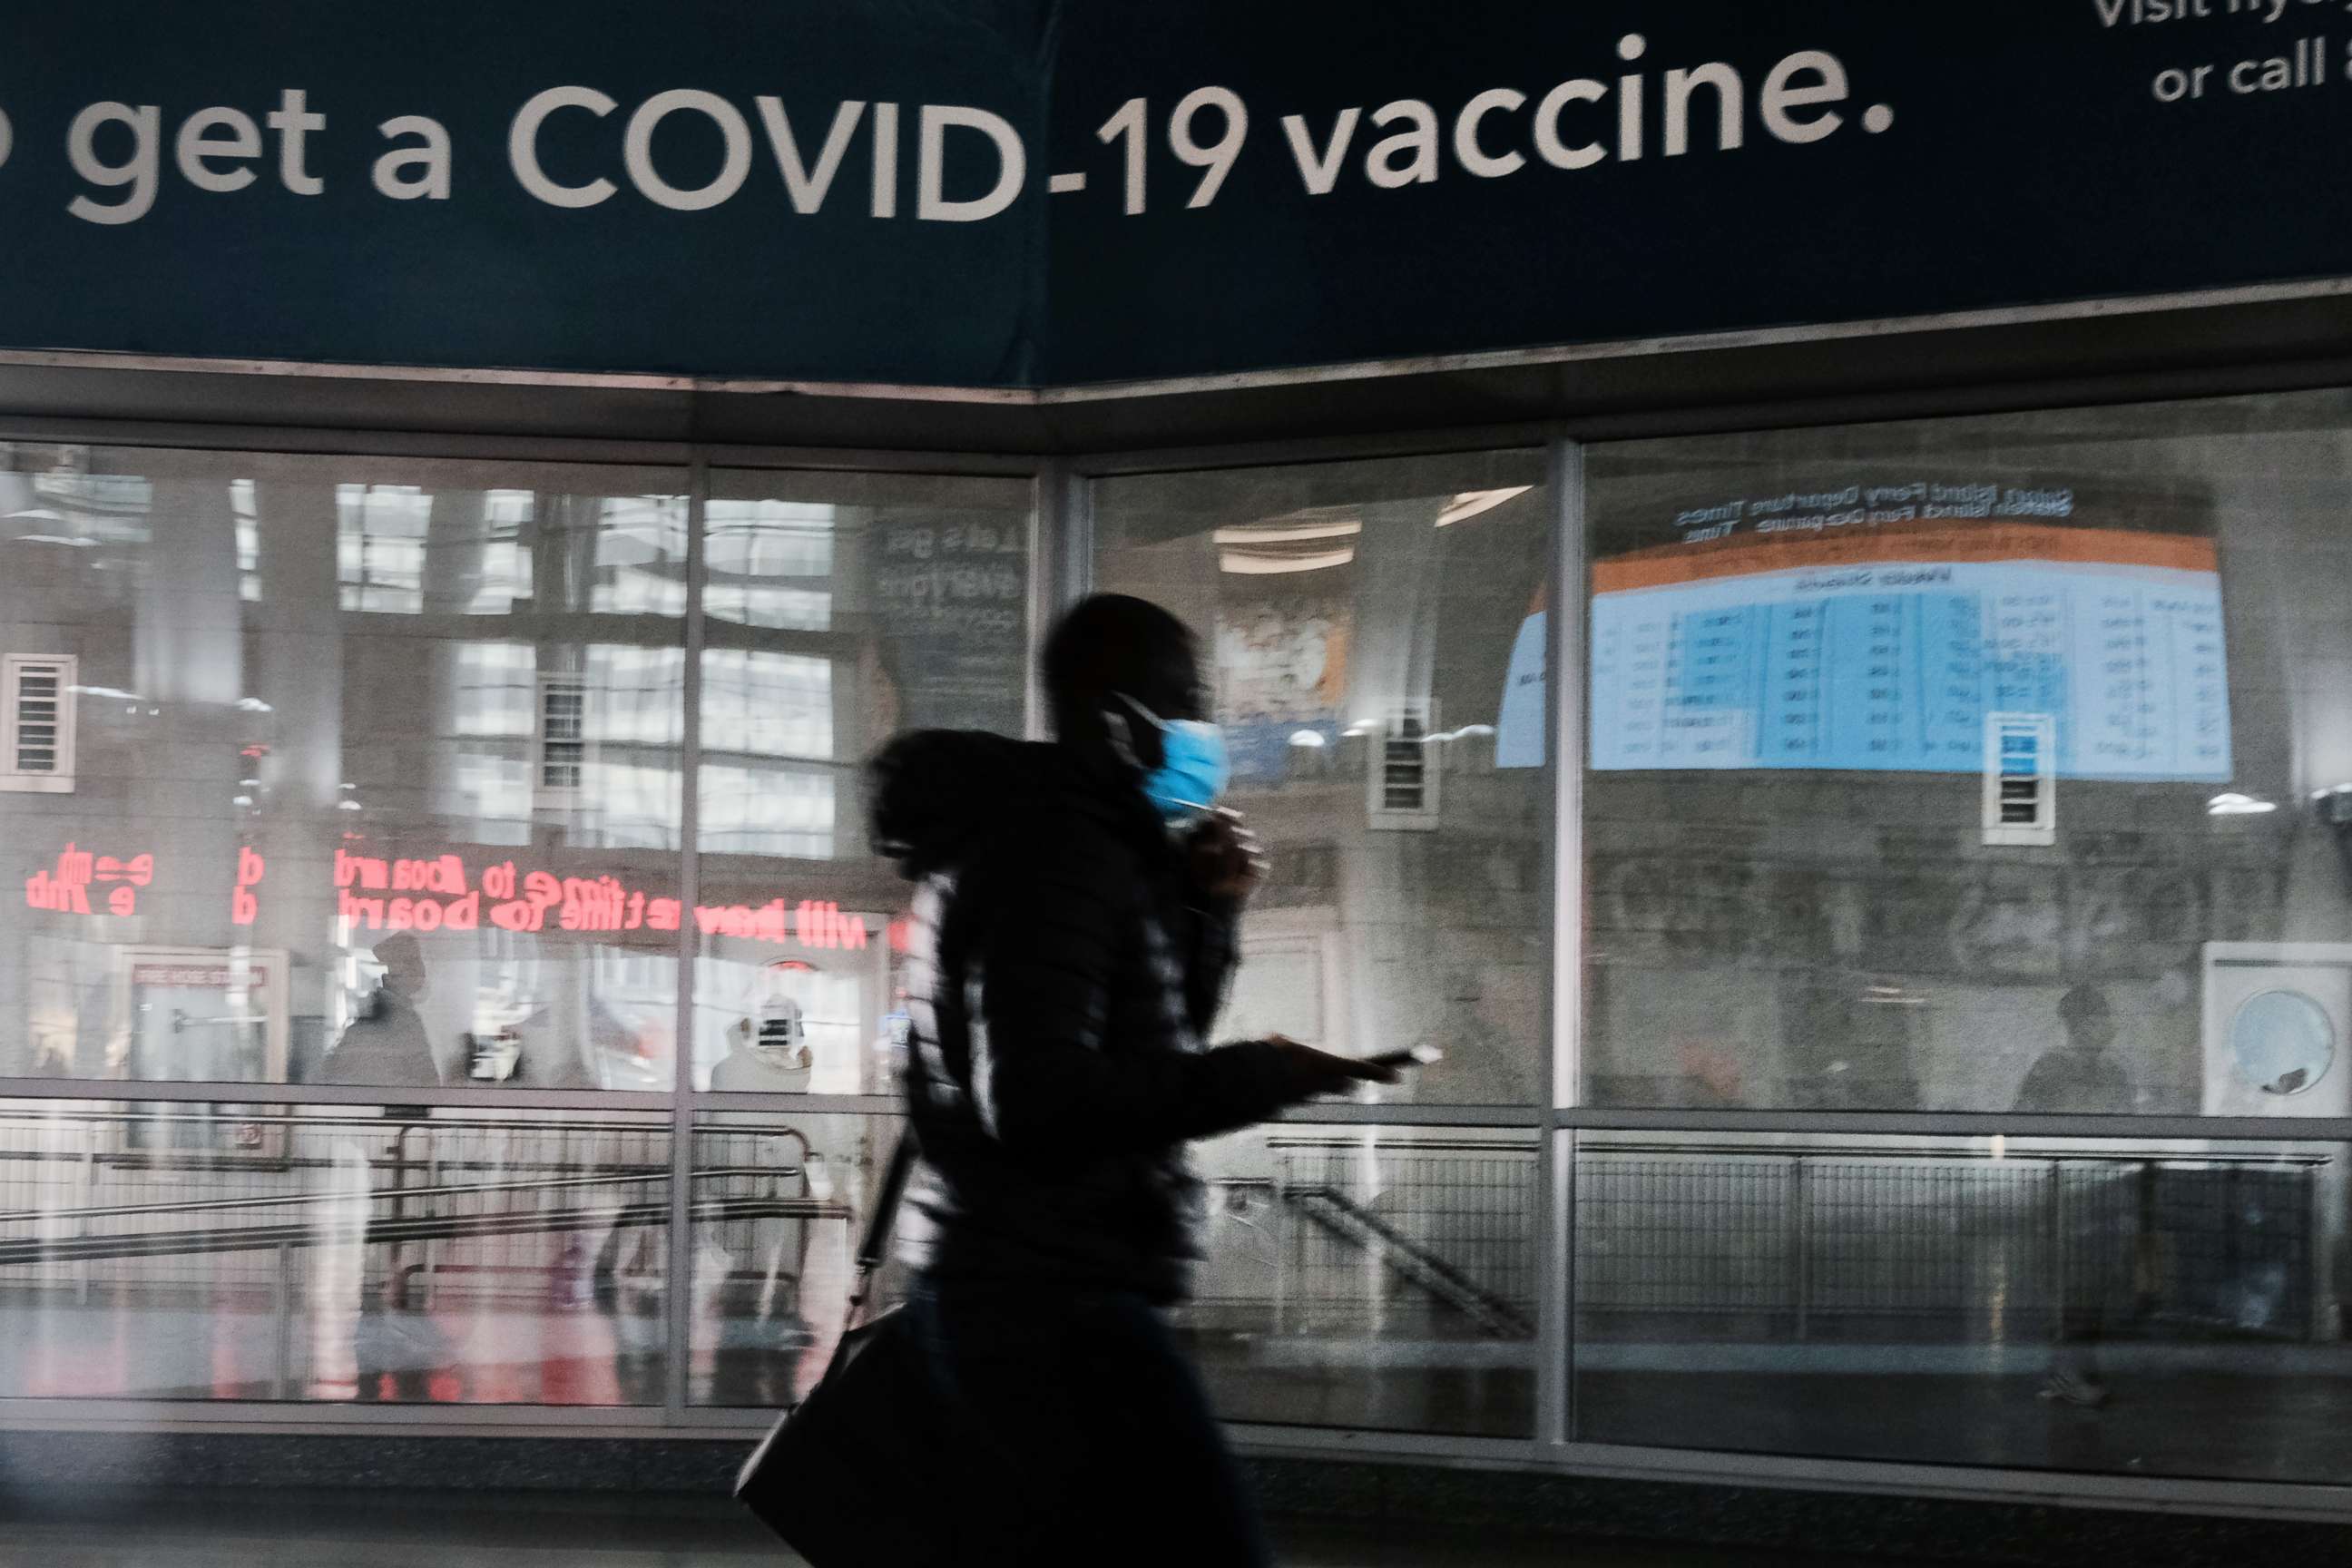 PHOTO: A sign urges people to get the COVID-19 vaccine at the Staten Island Ferry terminal on Nov. 29, 2021, in New York.